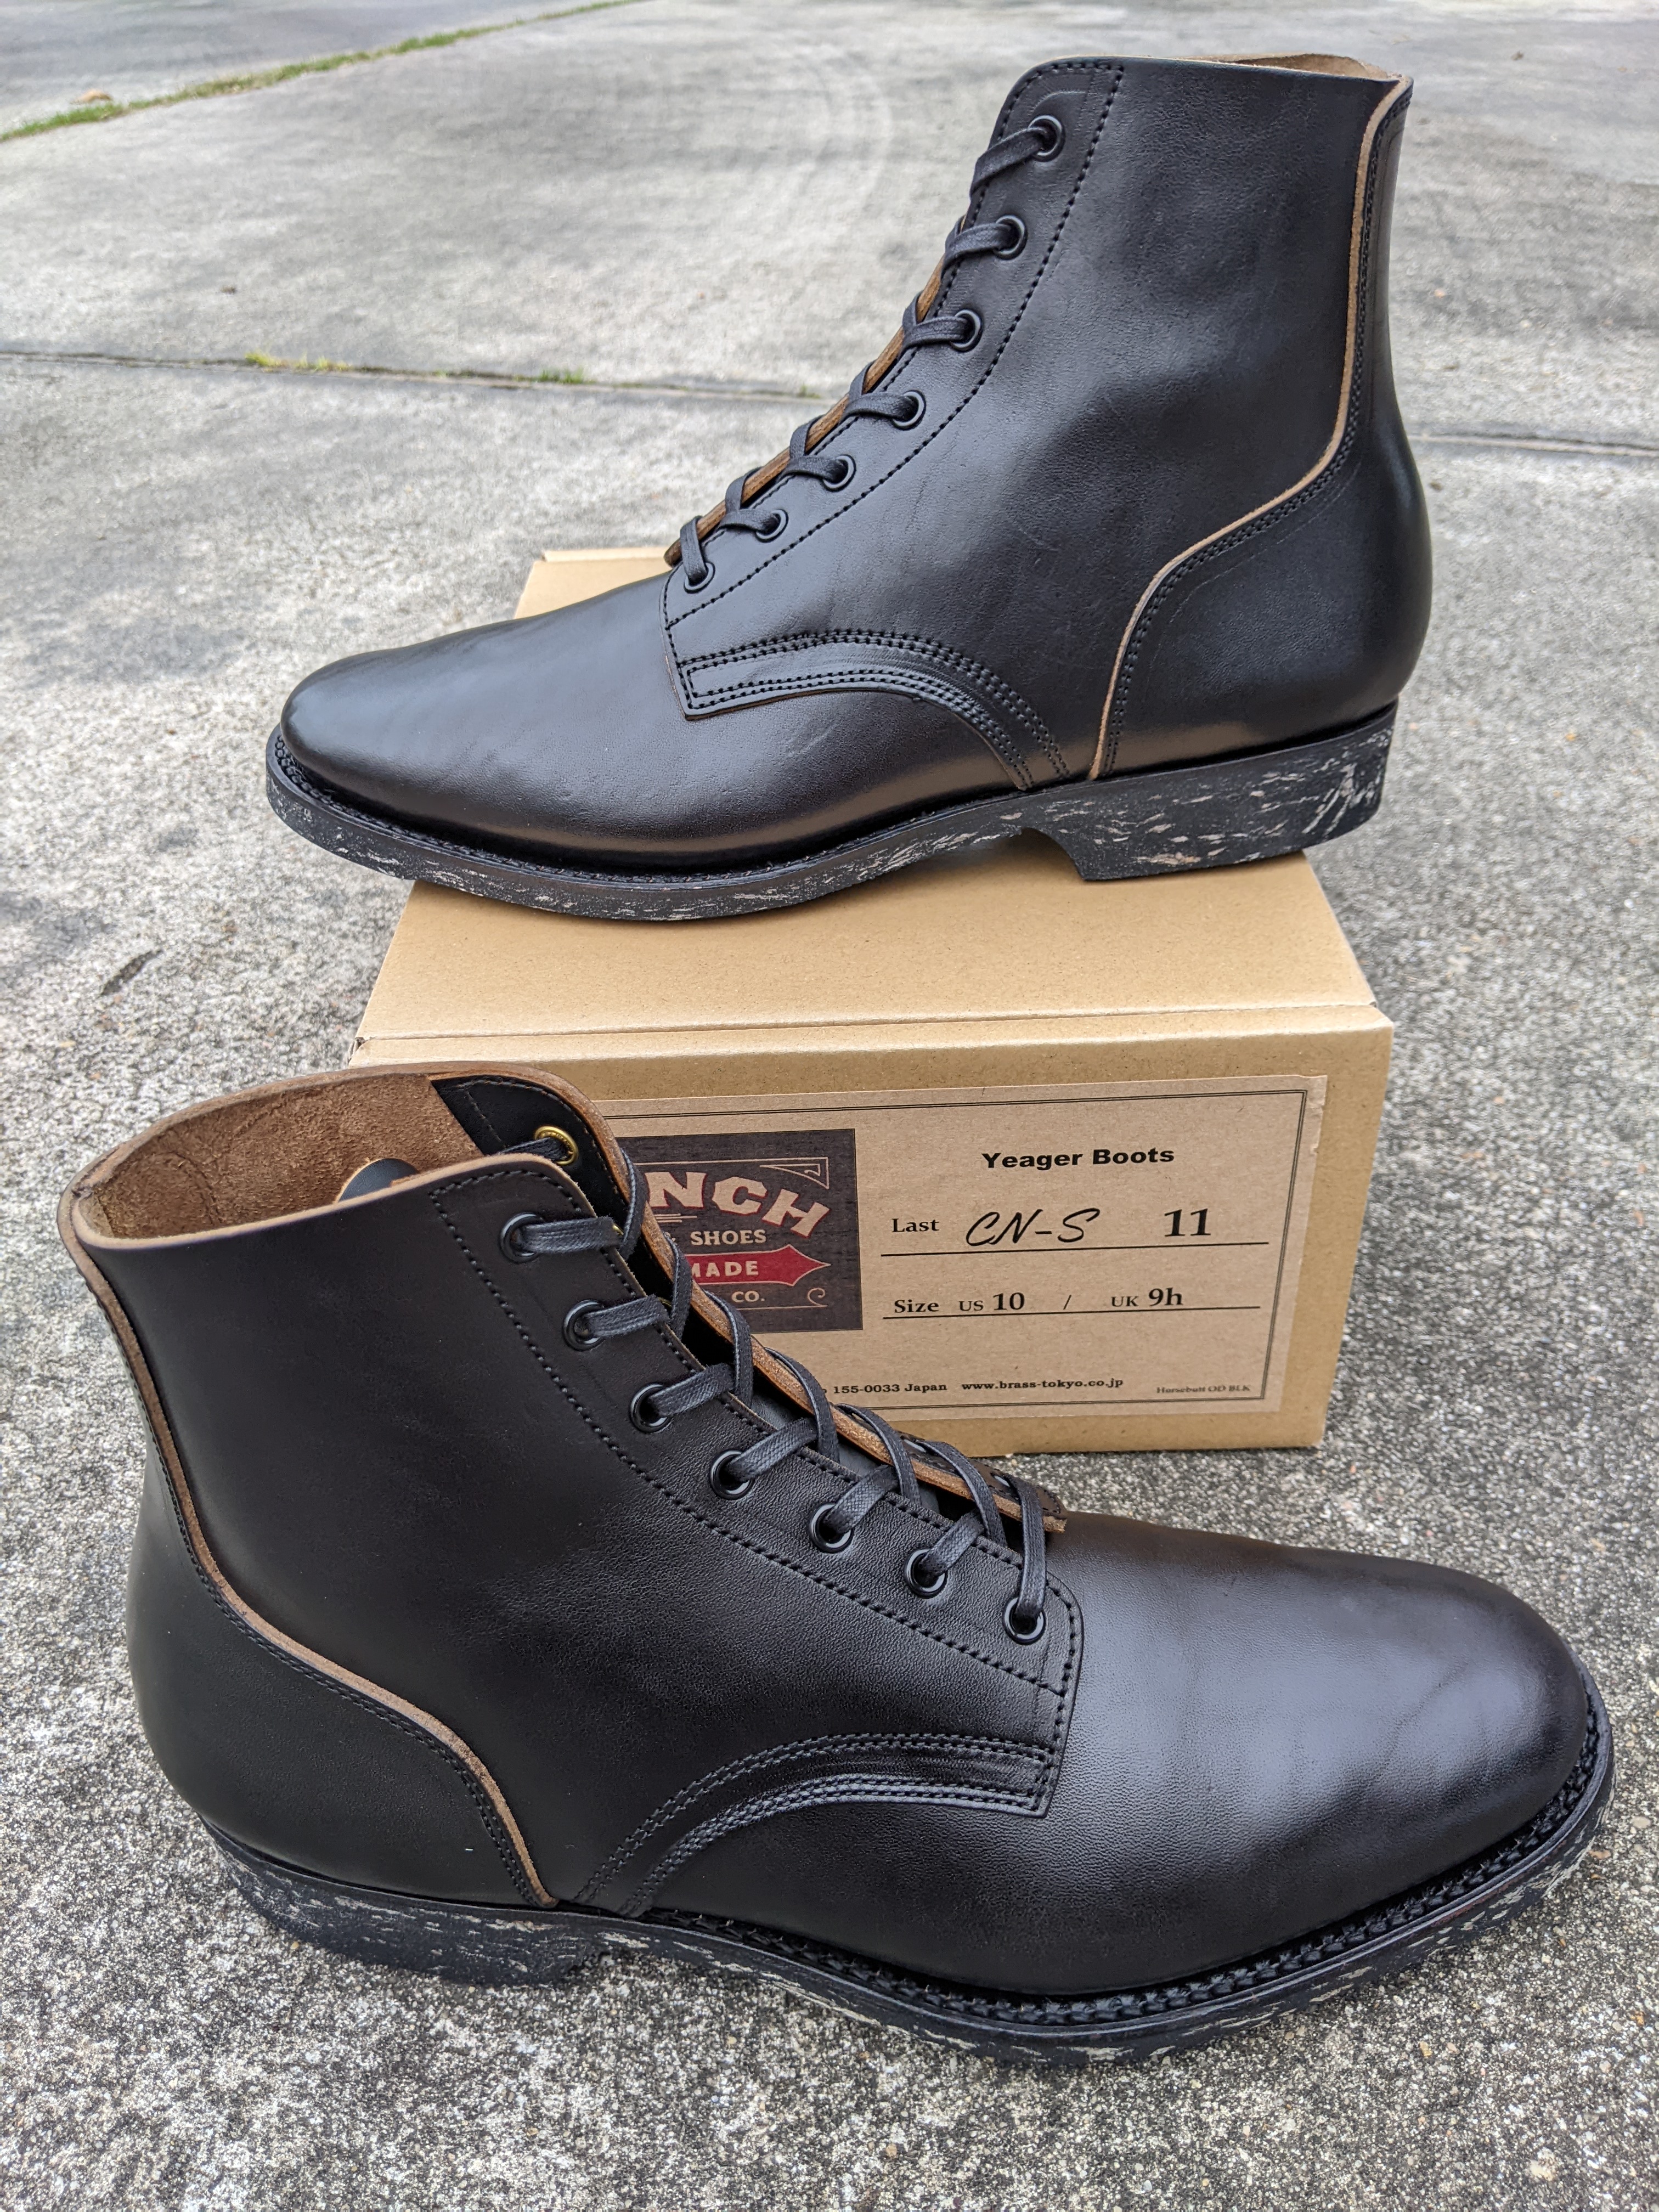 Clinch Black Overdyed Horsebutt Yeager Boots CN-S Clinch 11